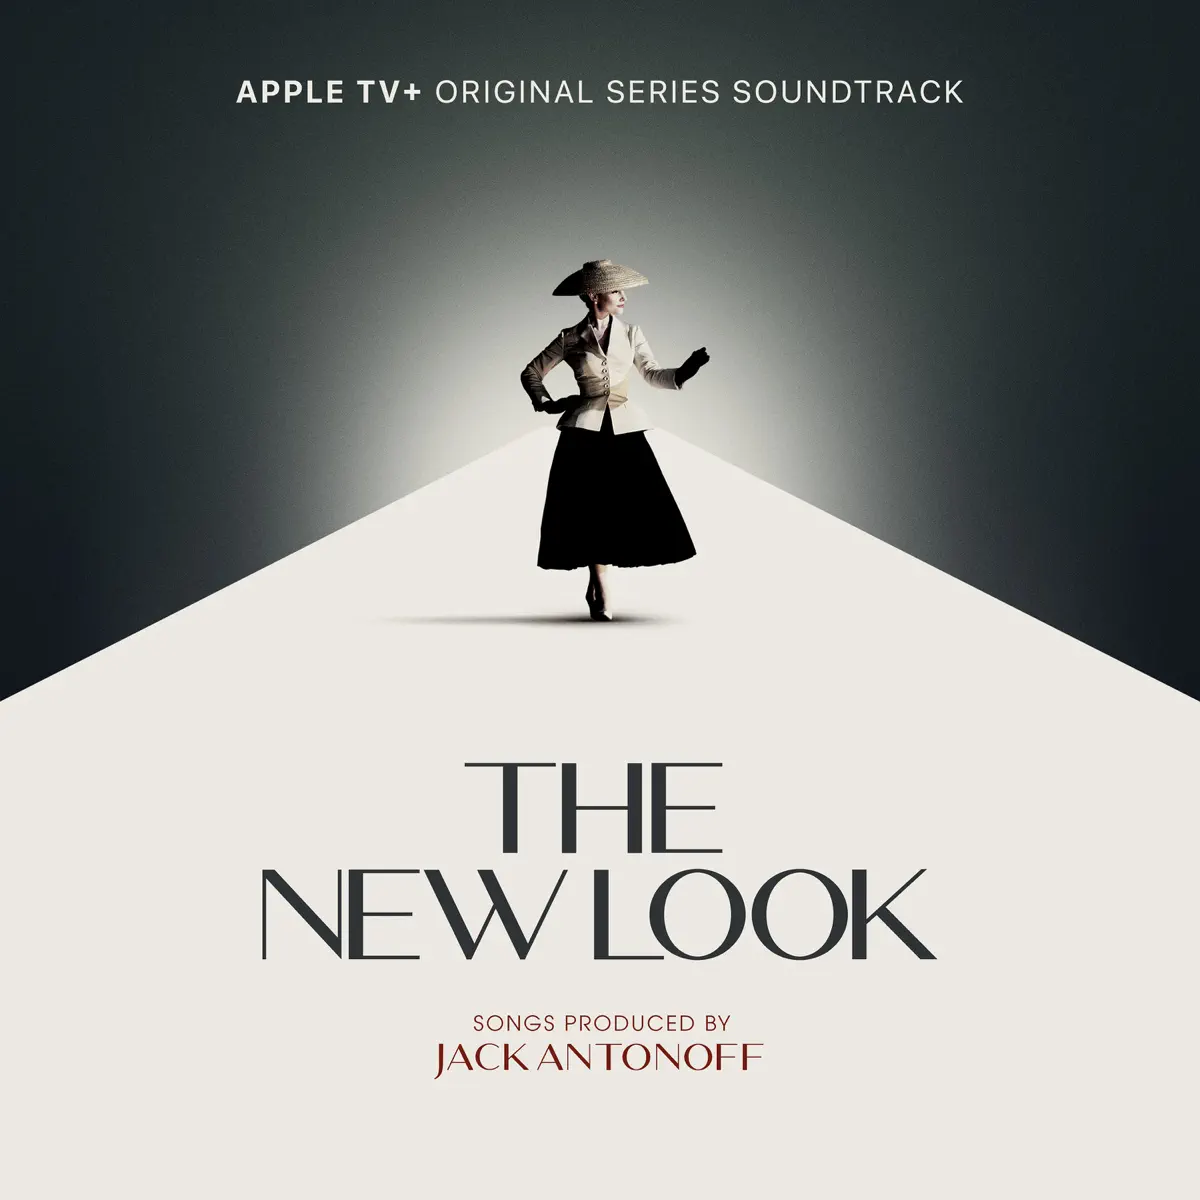 Lana Del Rey - Blue Skies (From "The New Look" Soundtrack) - Single (2024) [iTunes Plus AAC M4A]-新房子